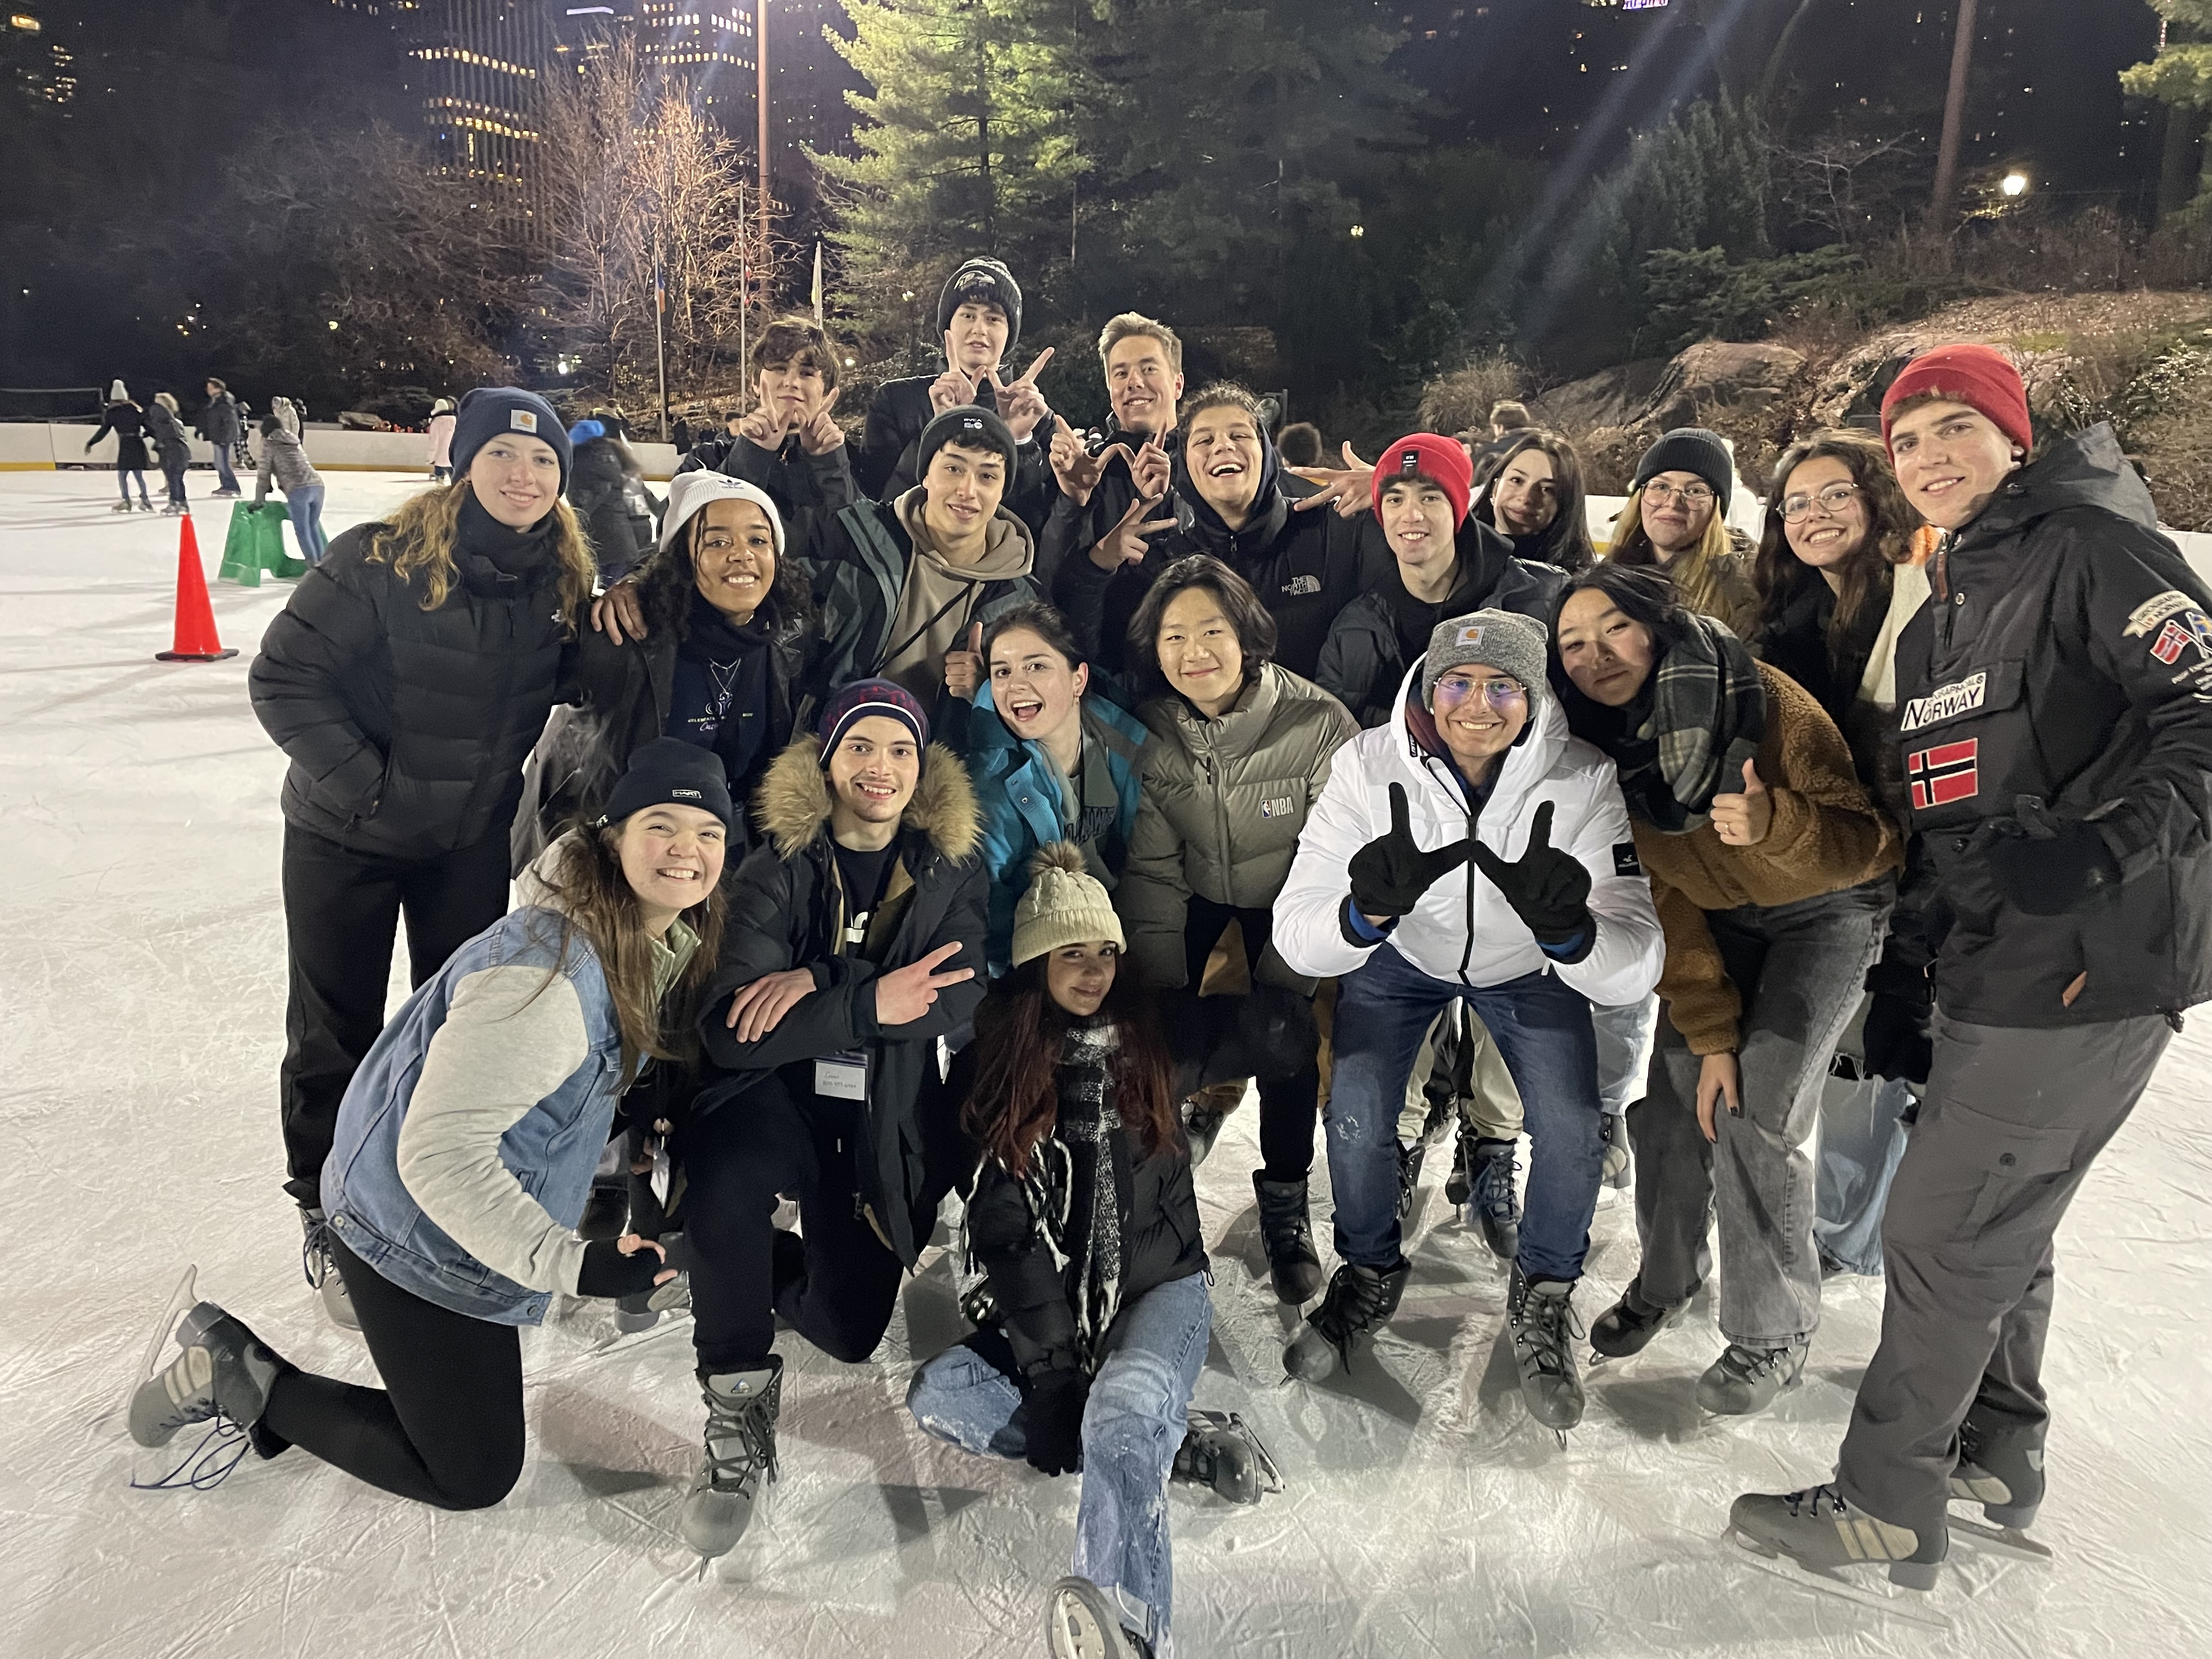 A Group Of Young People On An Ice Rink